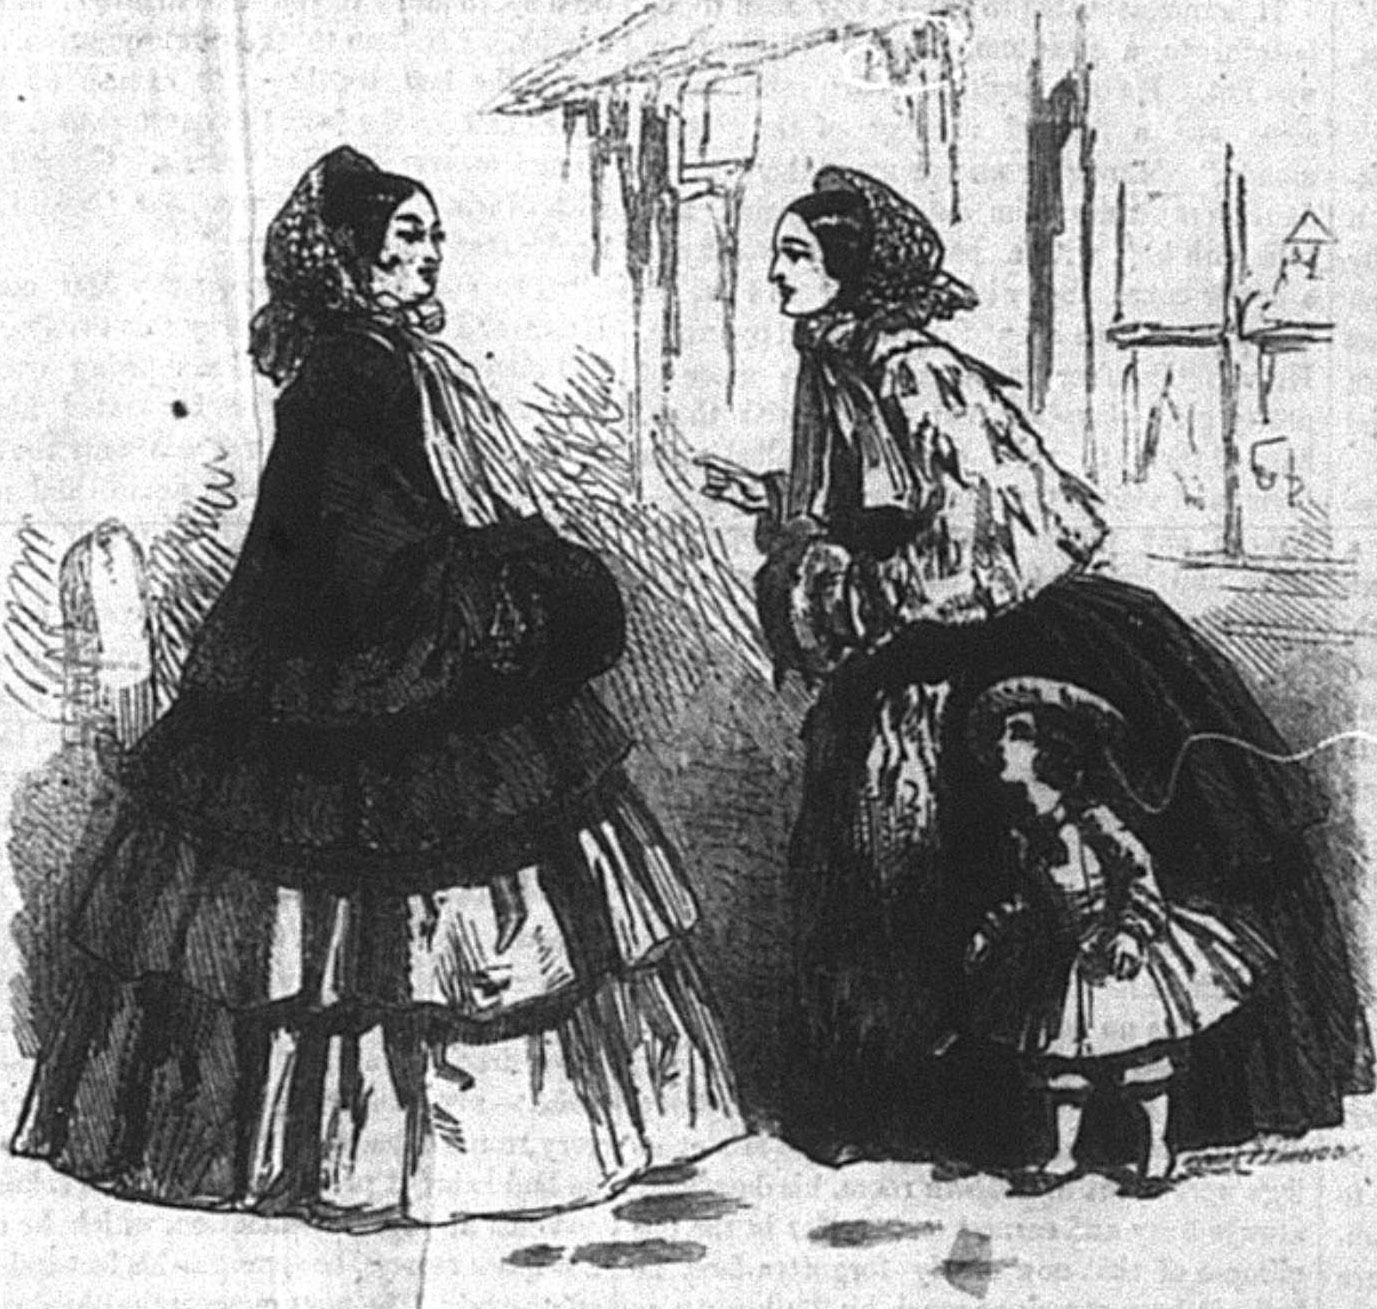 Two adult women talking to each other, with a young girl standing next to one of them.